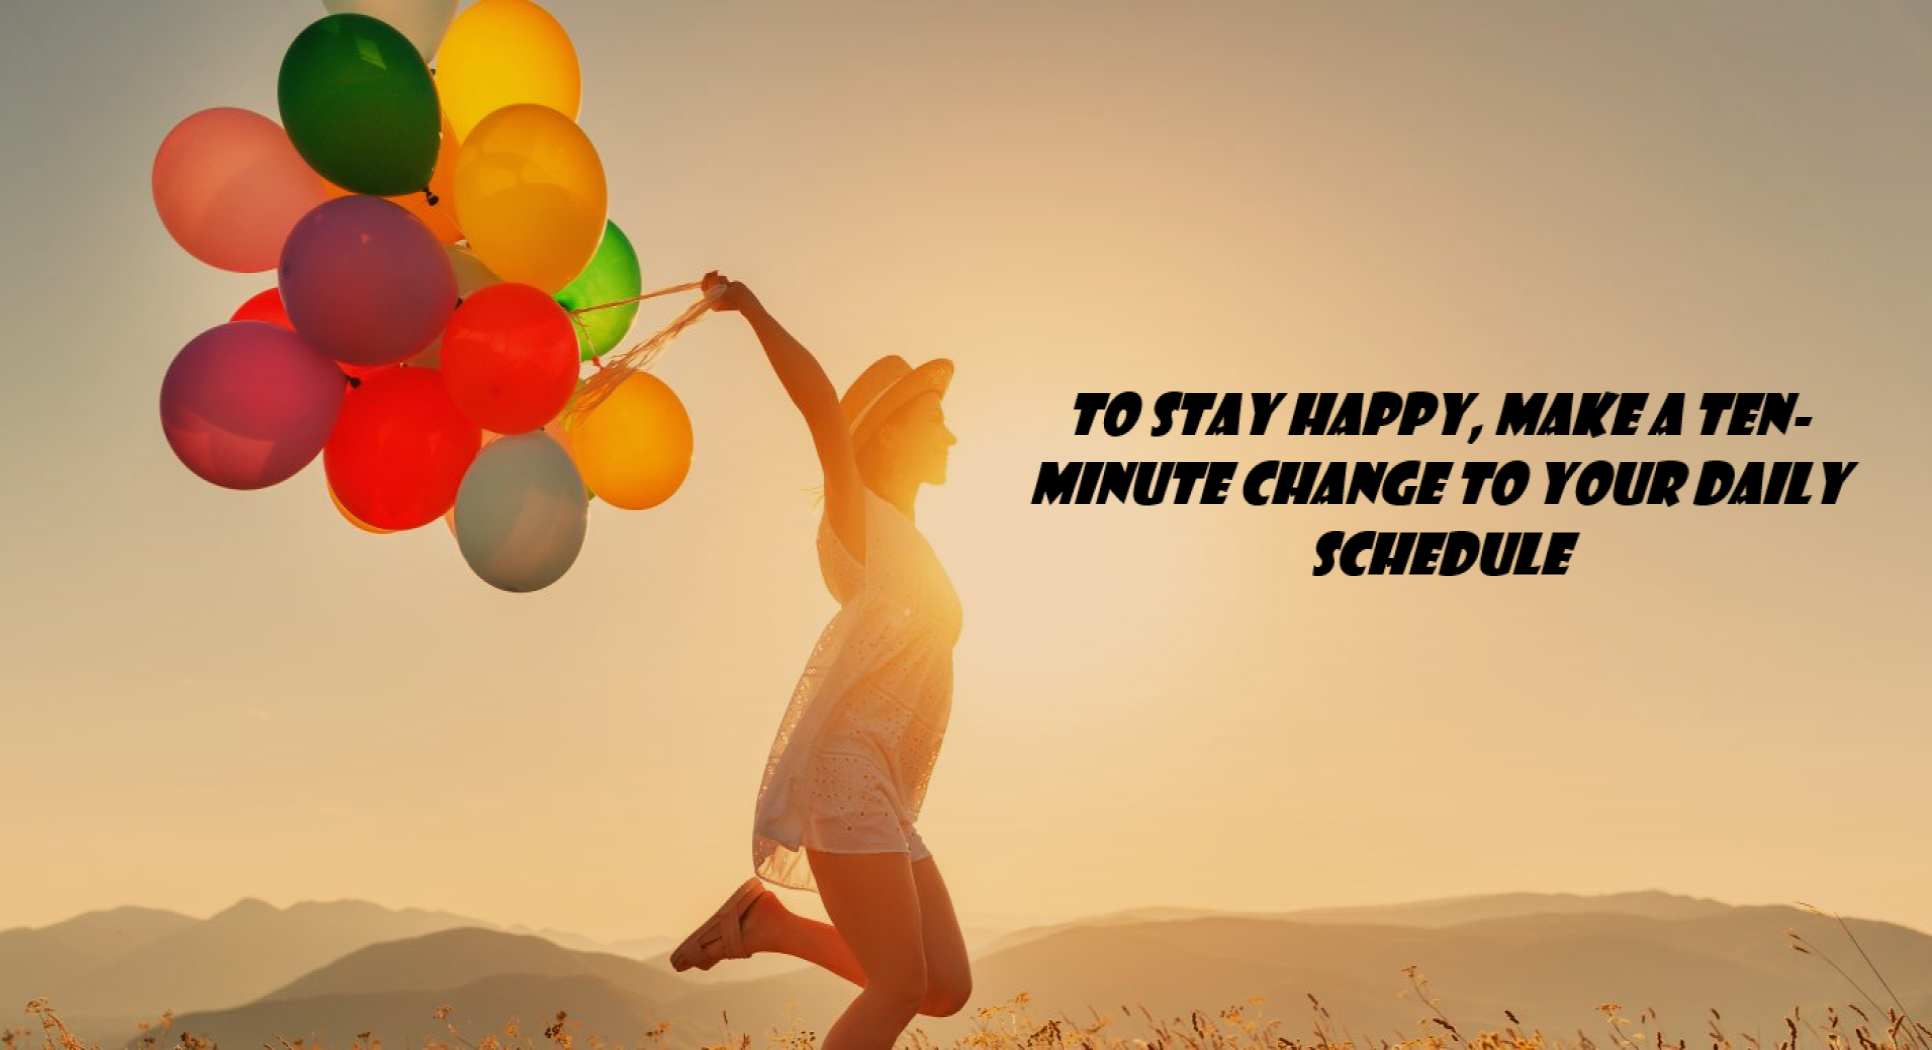 change in your daily routine to stay happy